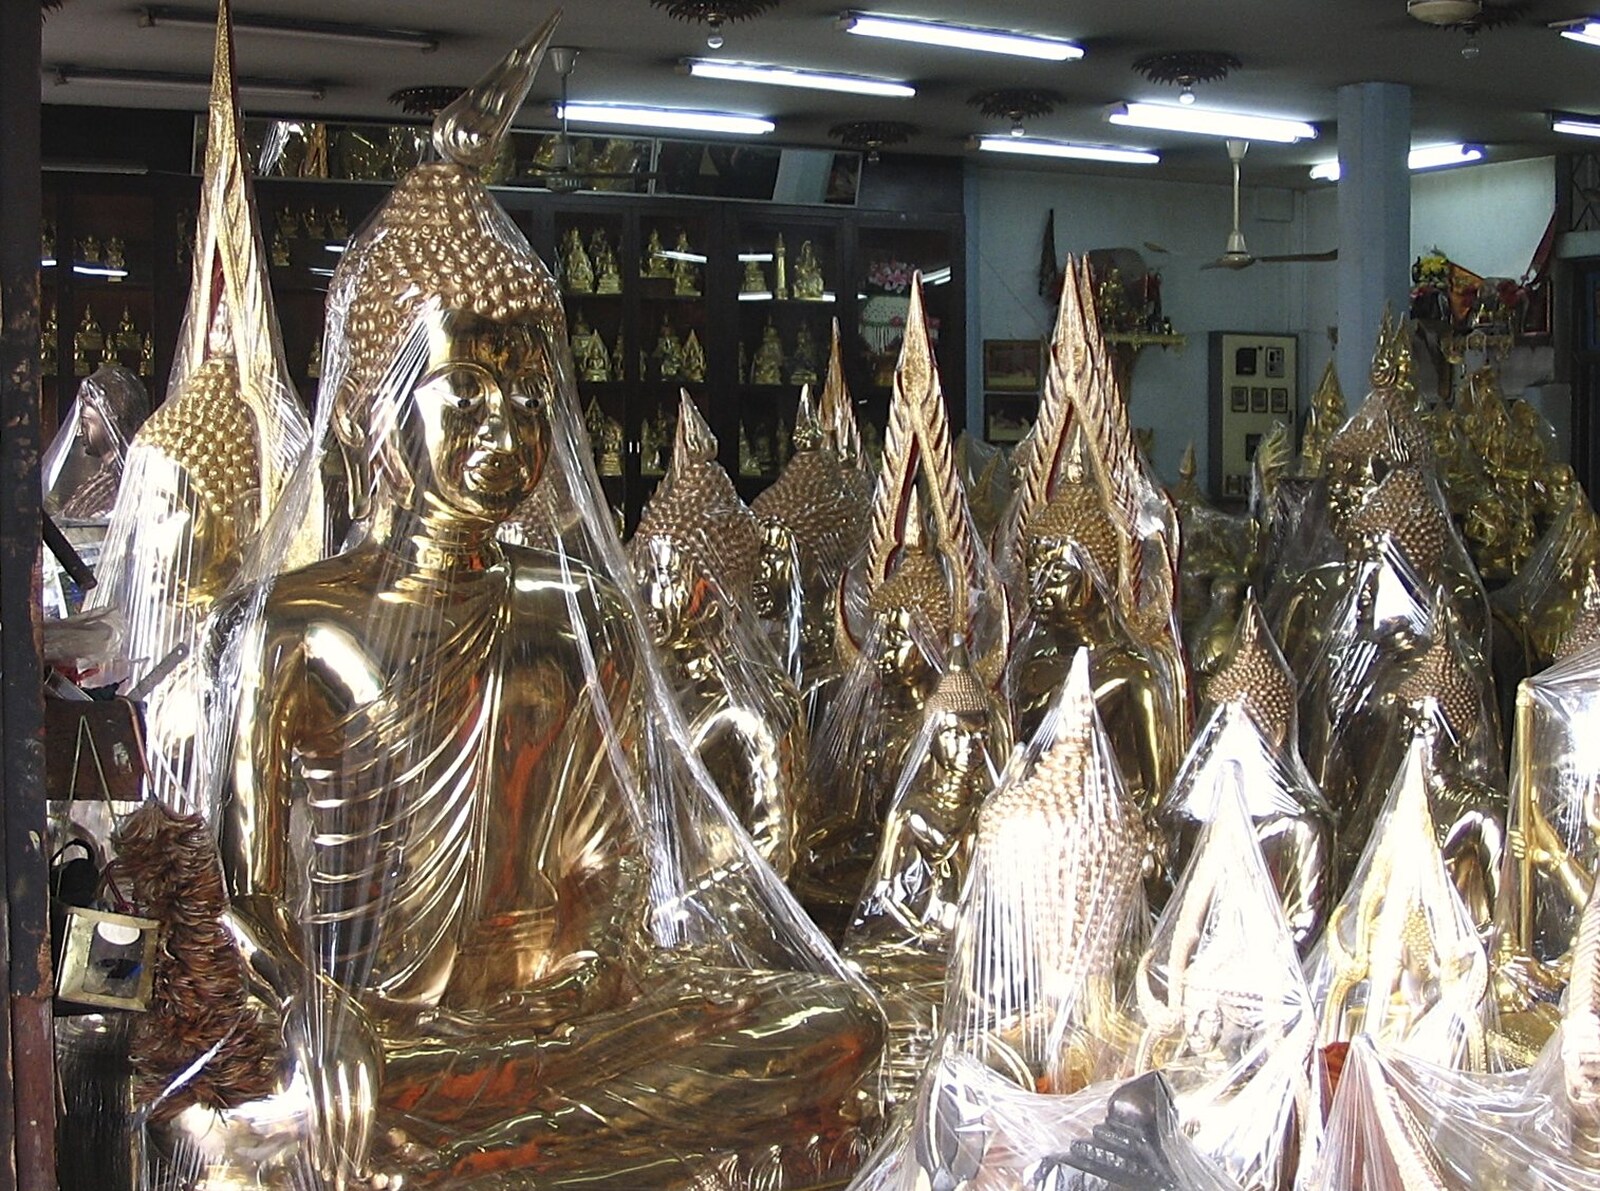 Plastic-wrapped Buddhas from A Working Trip to Bangkok, Thailand - 2nd October 2004